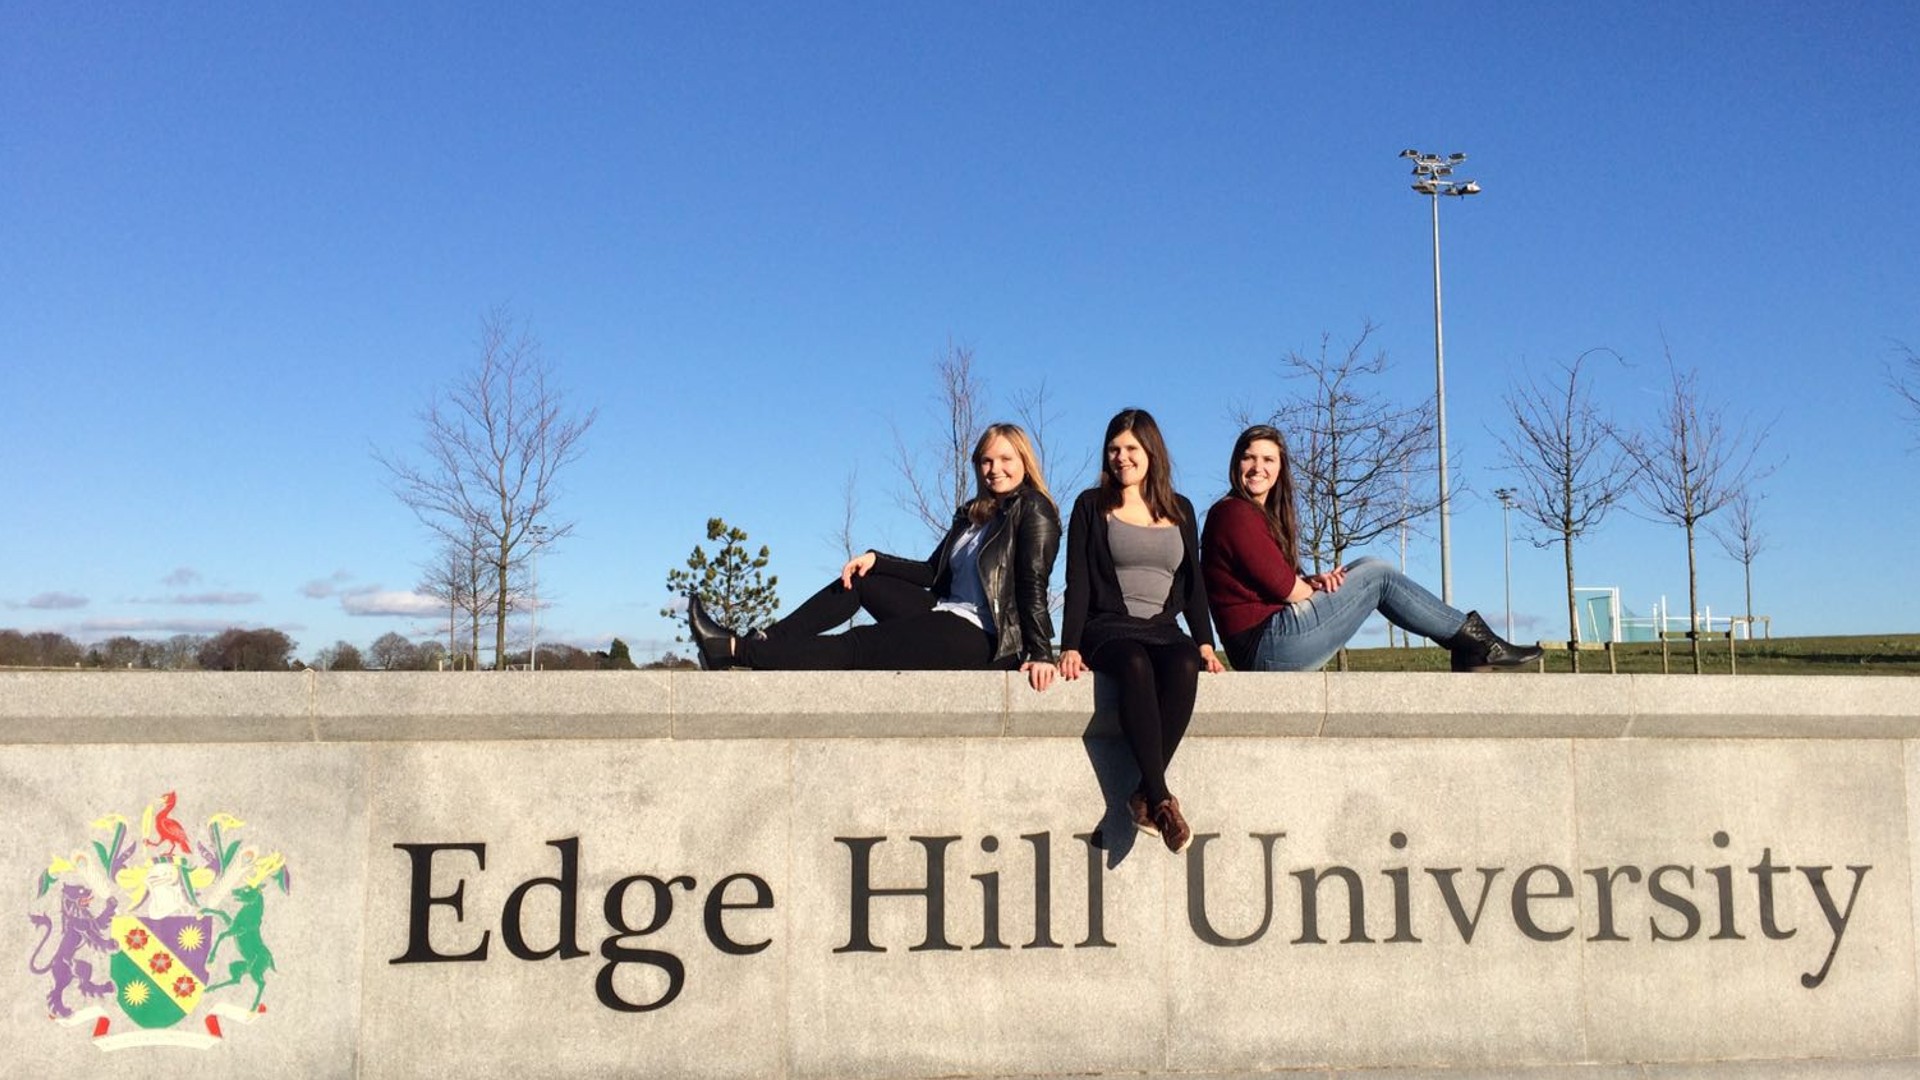 3 female students sat on the Edge Hill University sign